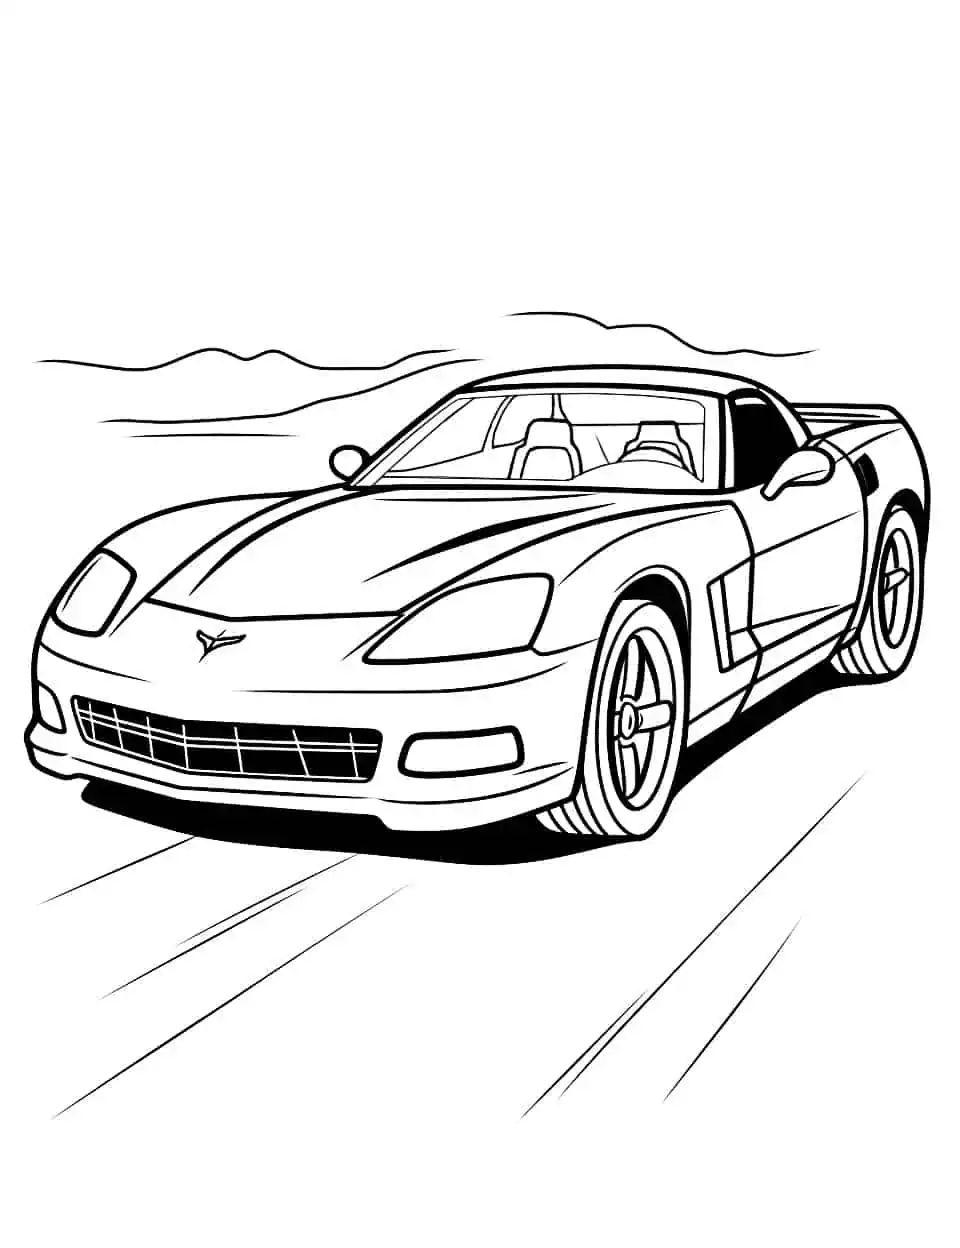 The Legendary Corvette Car Coloring Page - An image of a sleek Corvette, ready for kids to color and make their own.